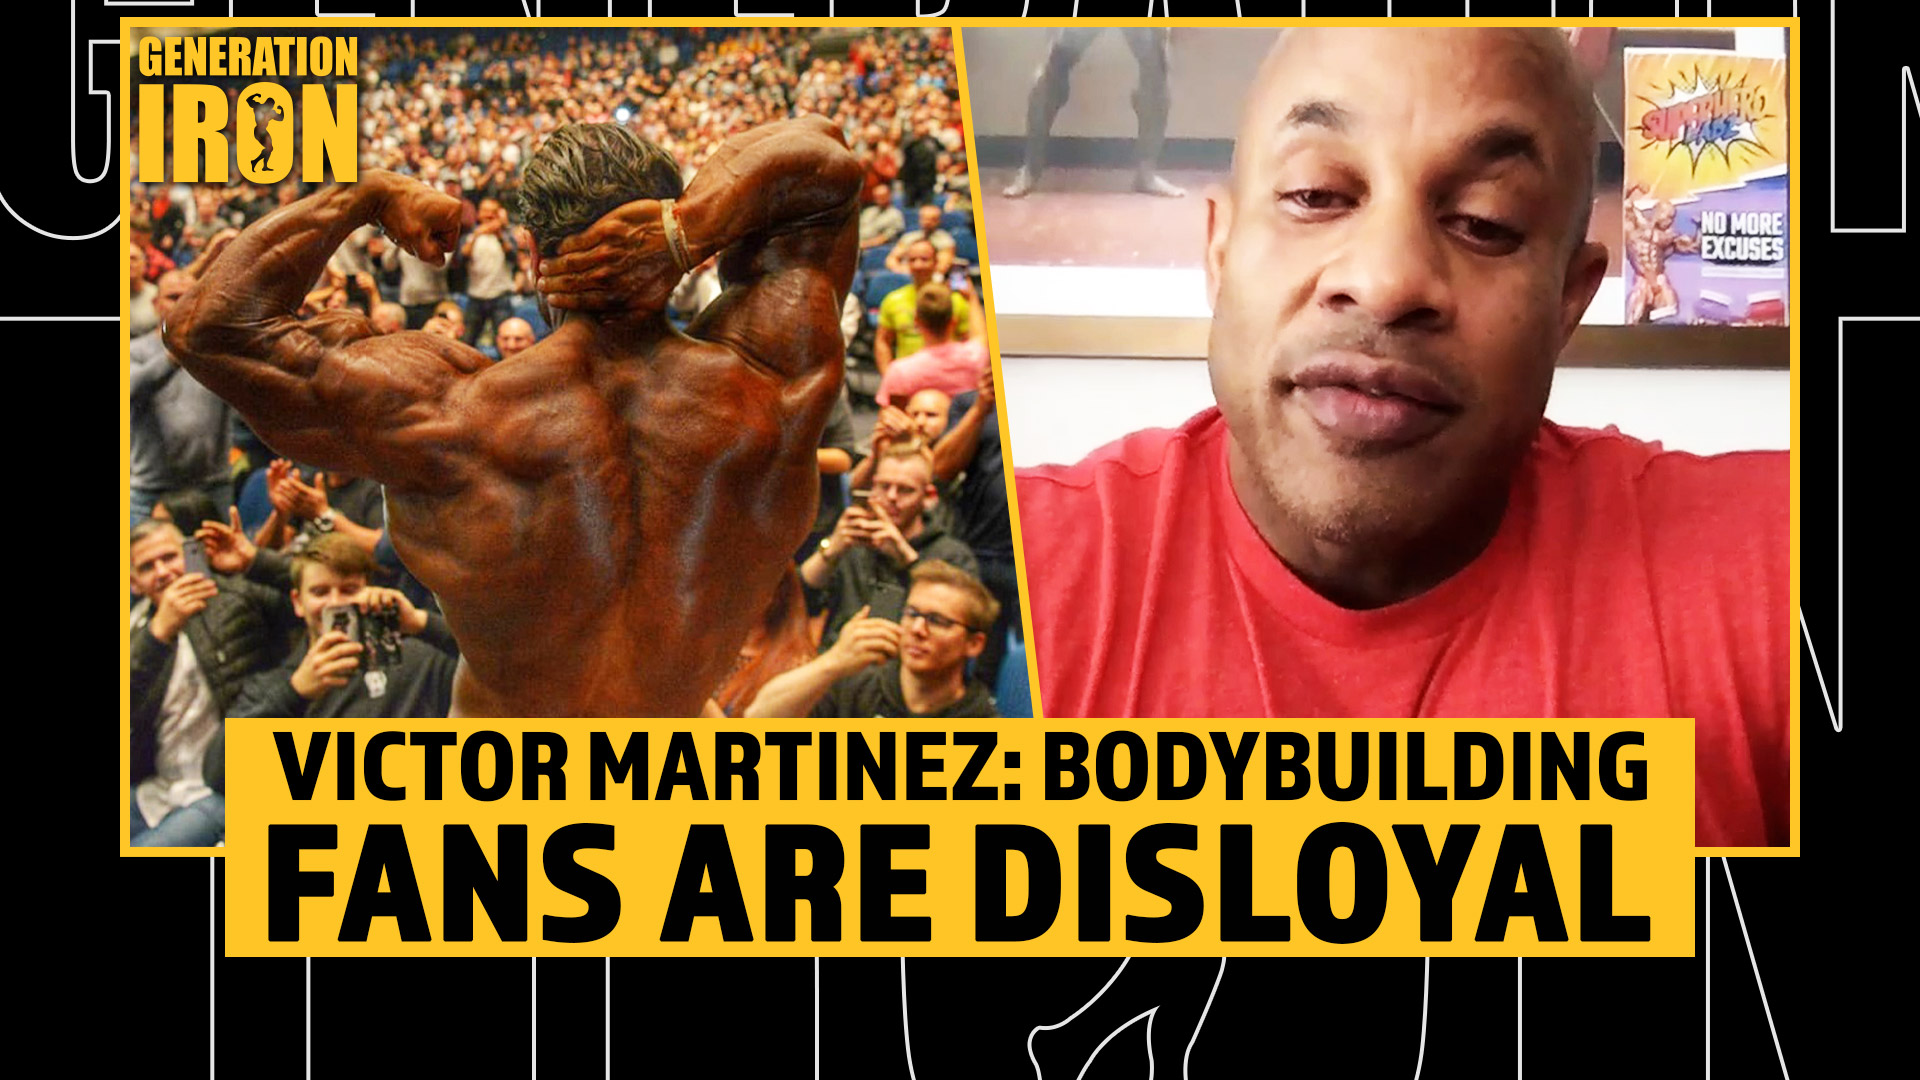 Victor Martinez: “Fans In Bodybuilding Are The Most Disloyal”